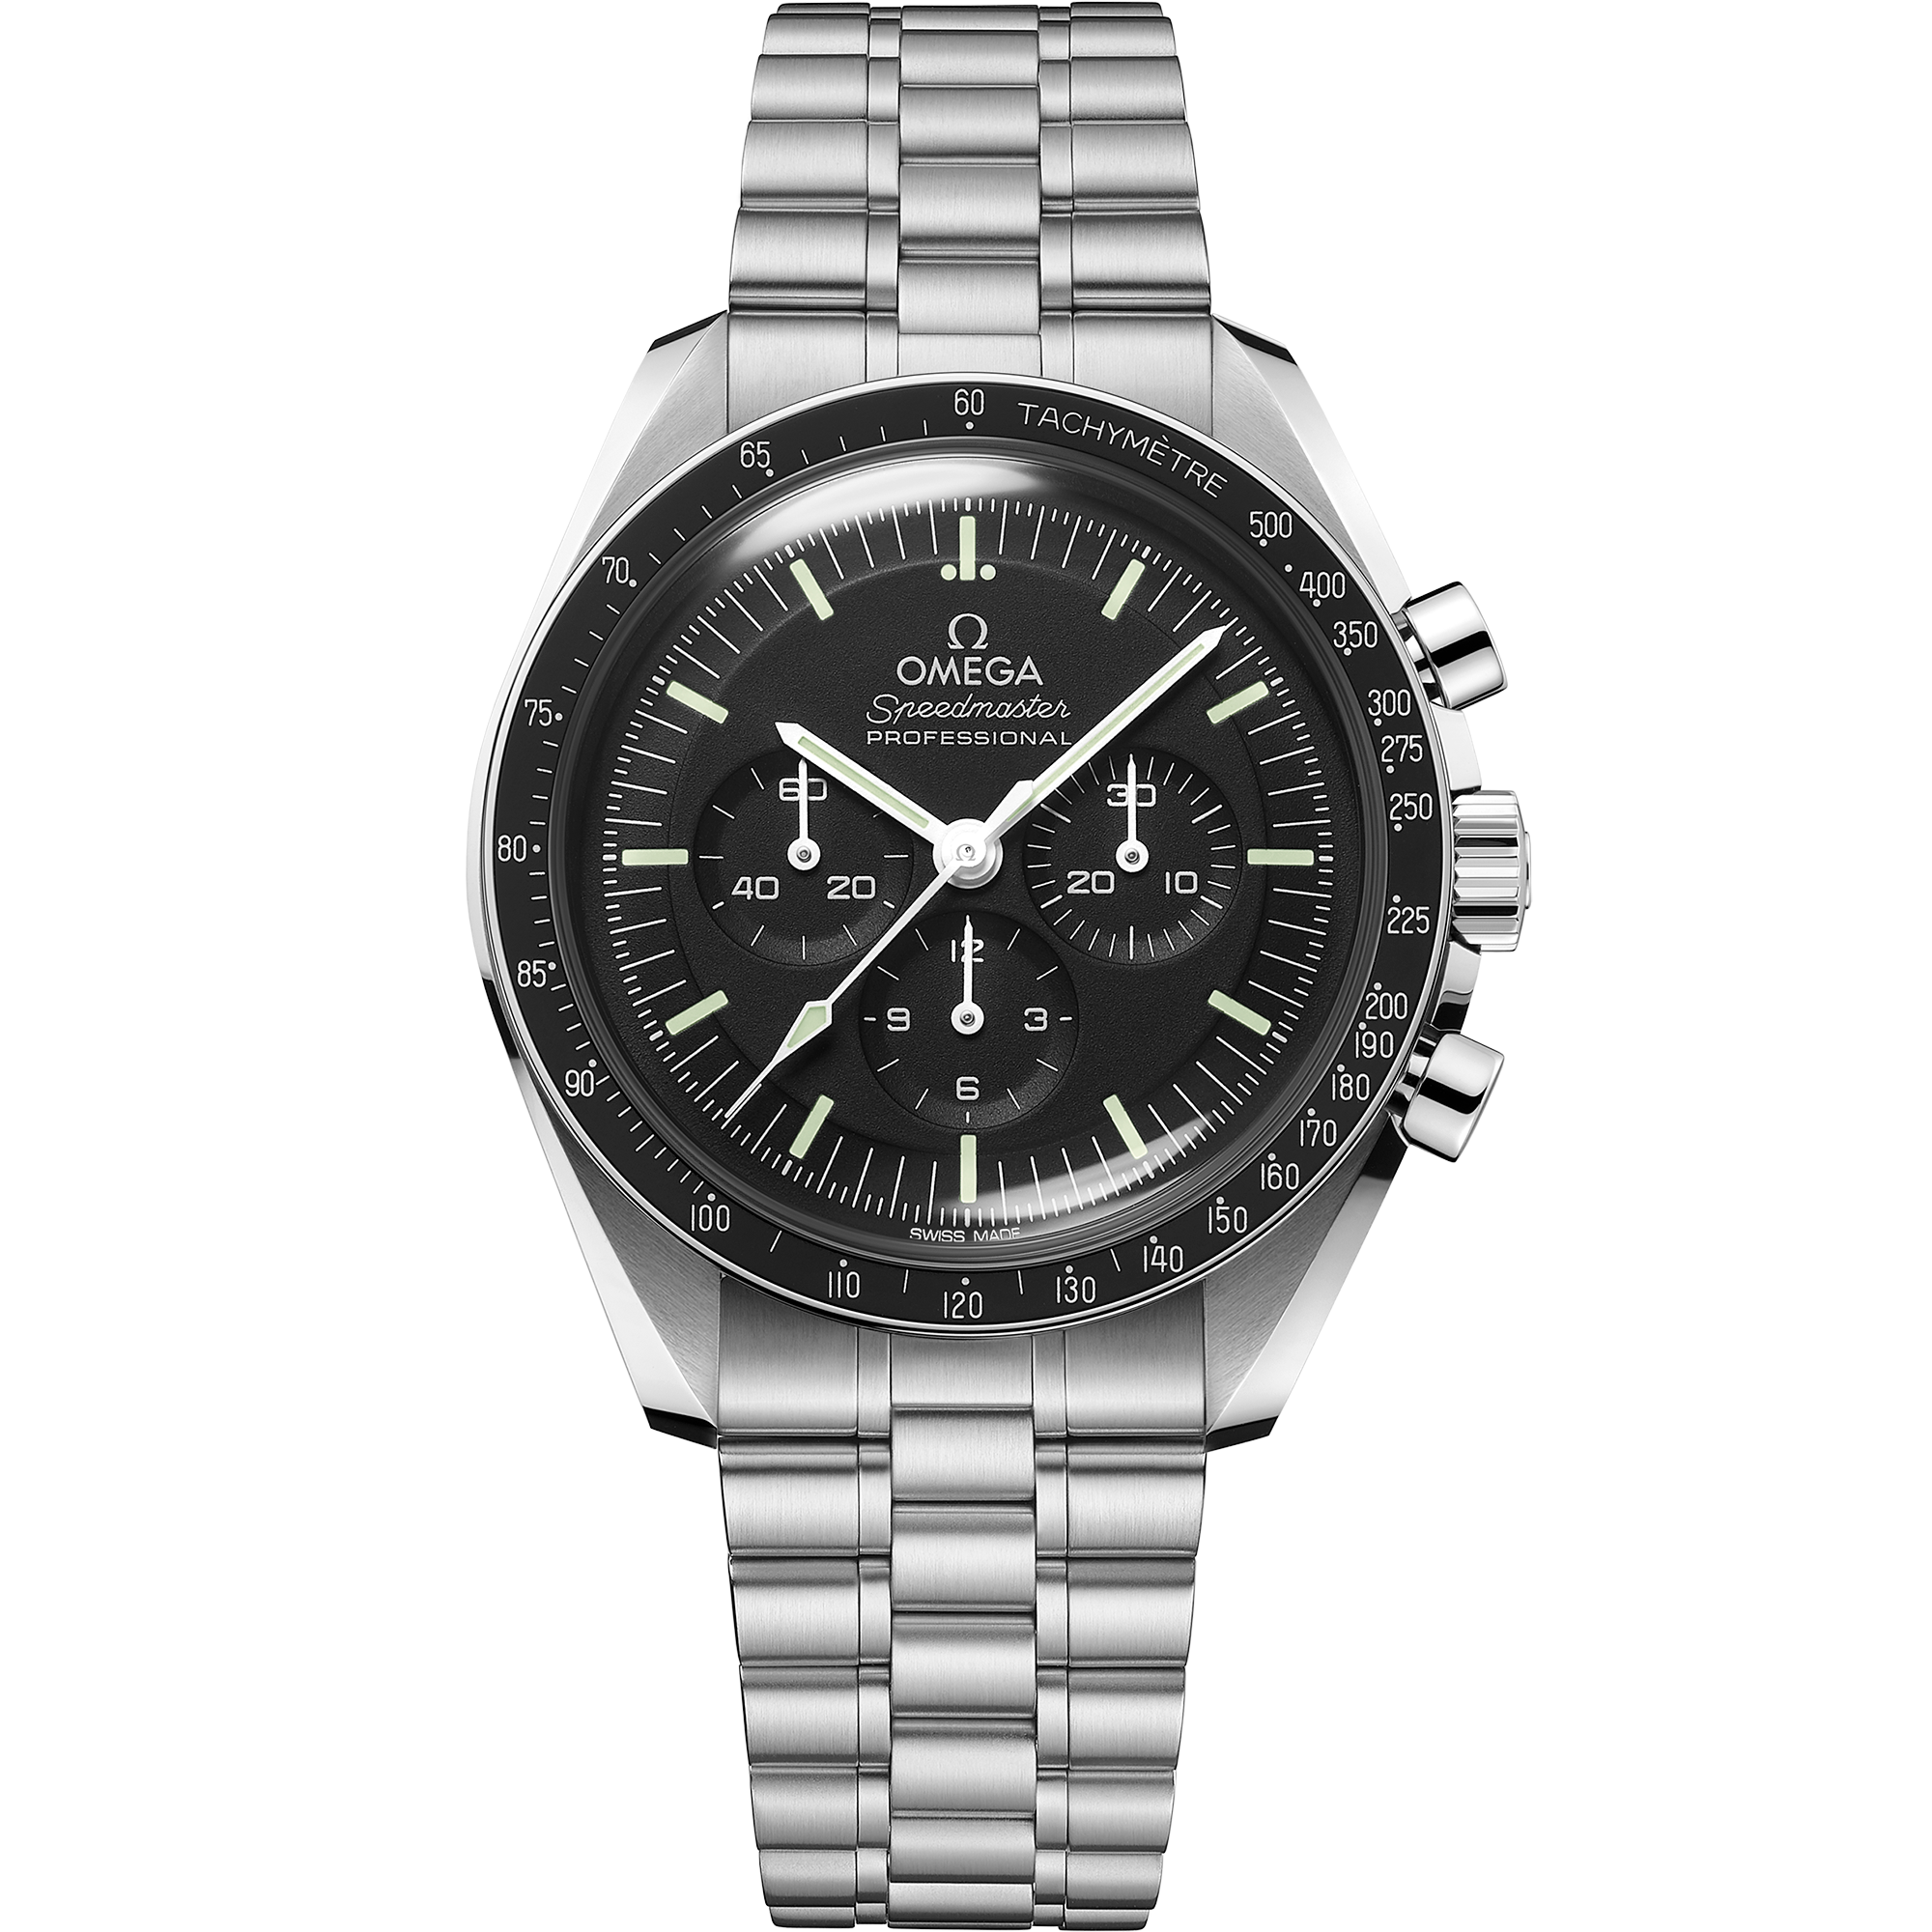 omega-speedmaster-moonwatch-professional-co-axial-master-chronometer-chronograph-42-mm-31030425001001-3ccf4a.png